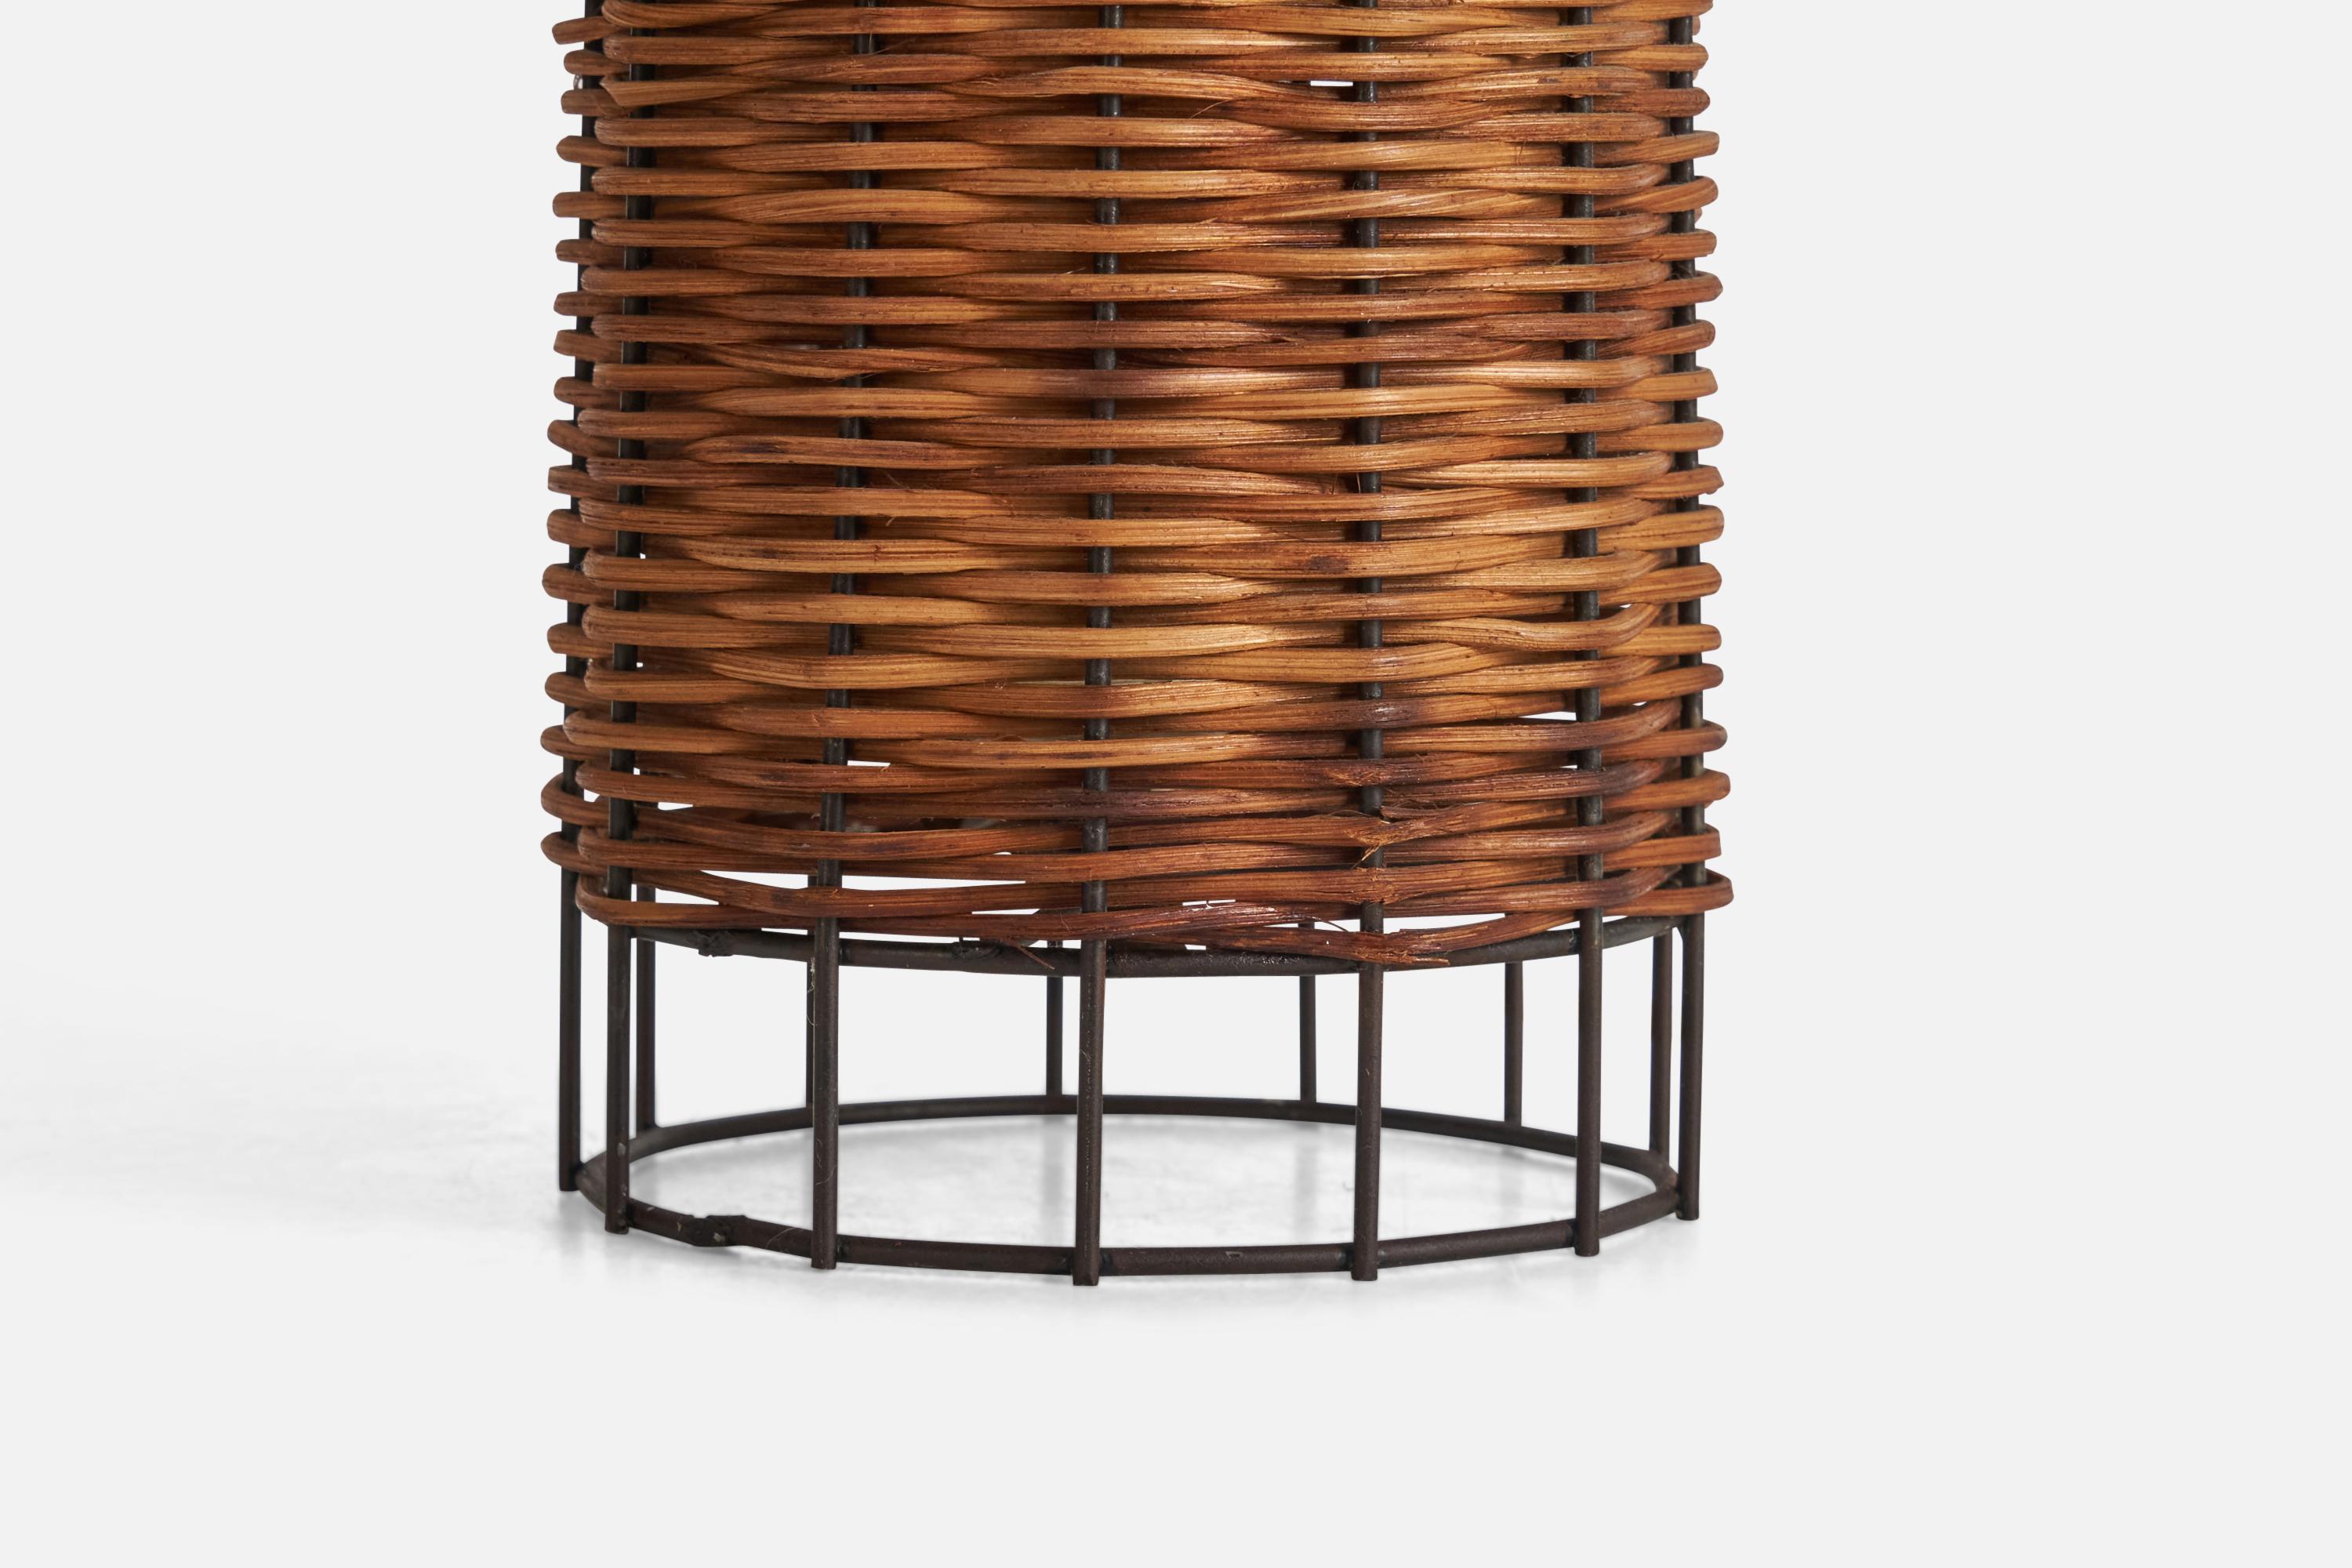 Mid-20th Century American Designer, Table Lamps, Lacquered Metal, Rattan, USA, 1950s For Sale